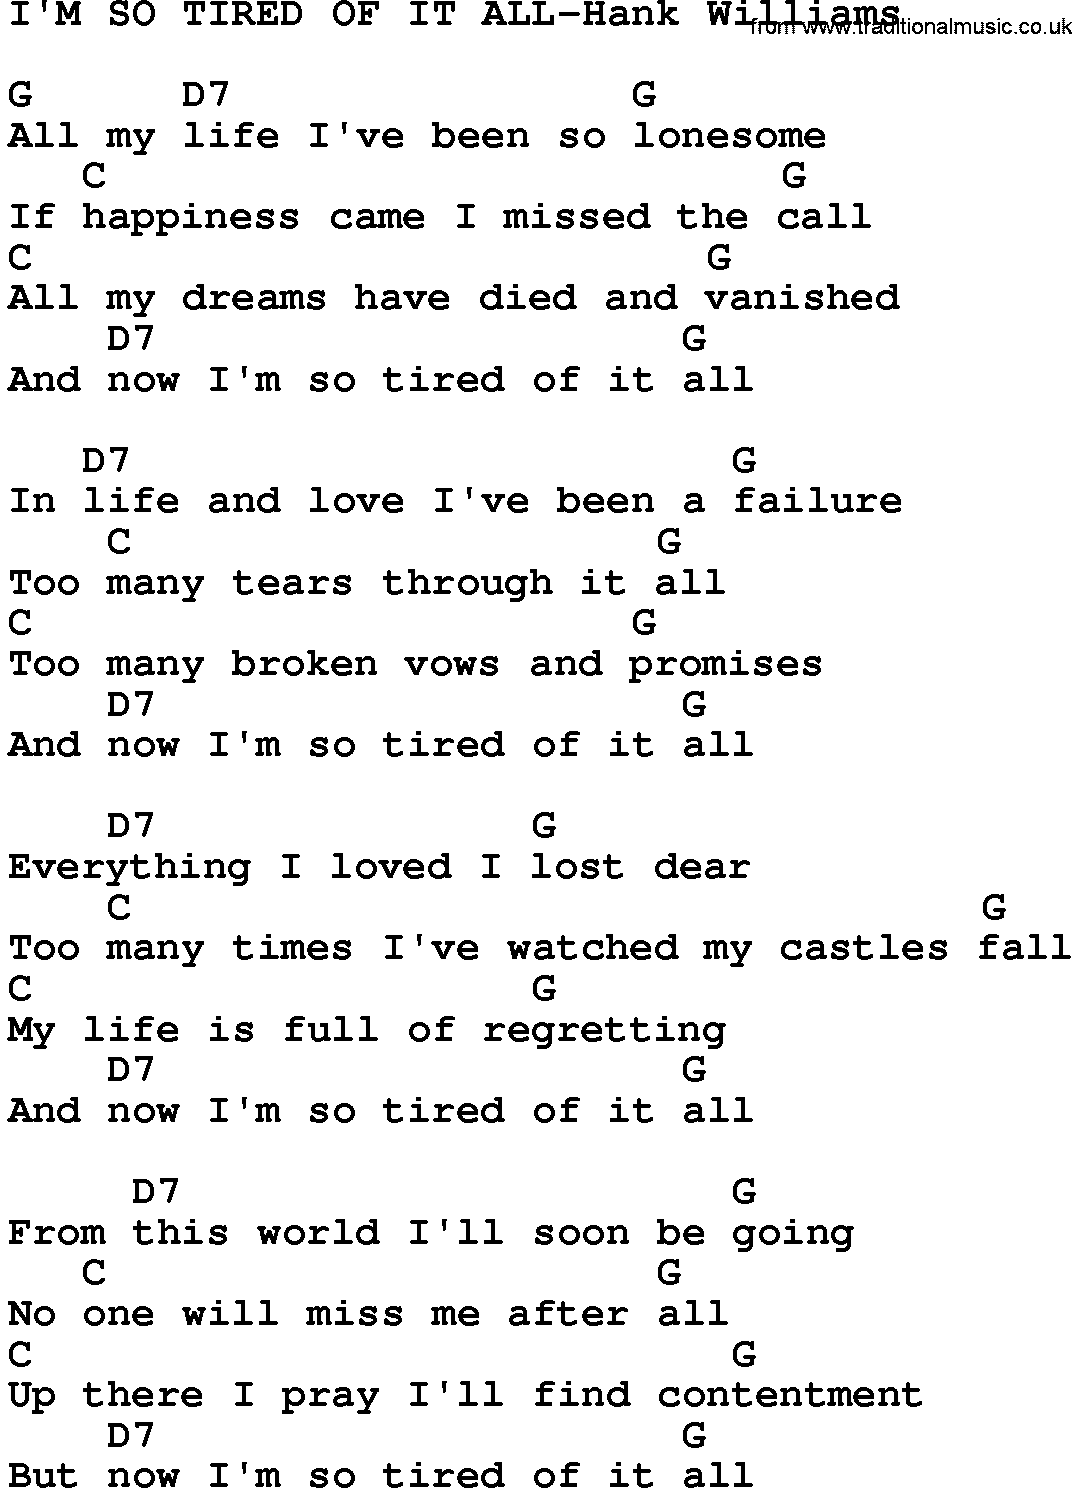 Country music song: I'm So Tired Of It All-Hank Williams lyrics and chords